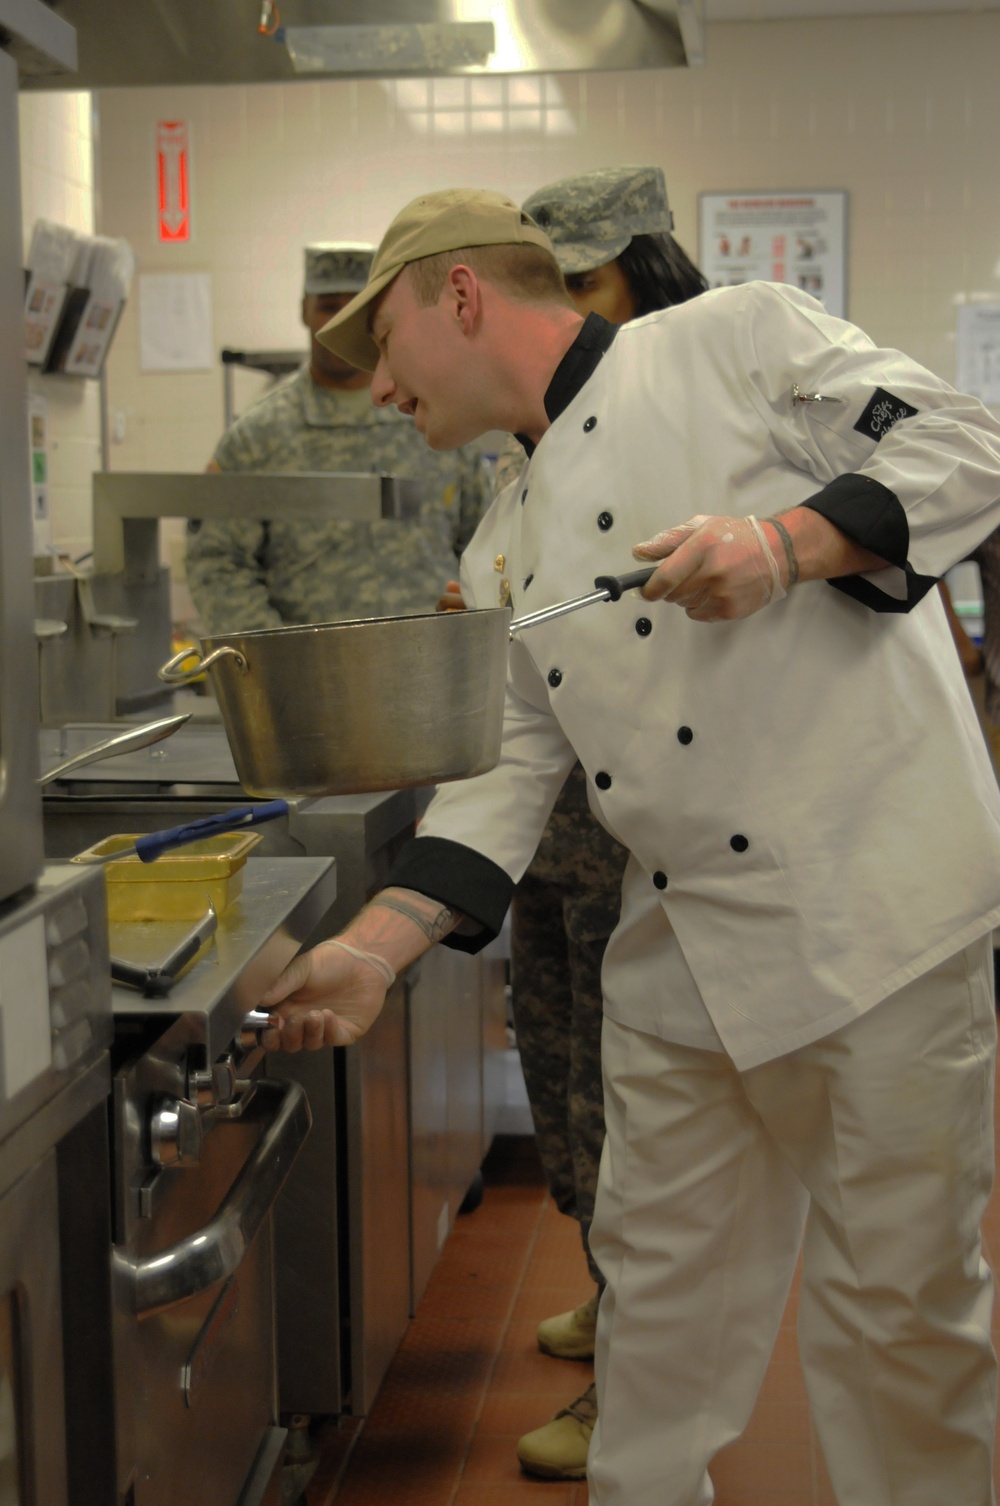 82nd Sustainment Brigade soldiers compete in Top Chef Competition